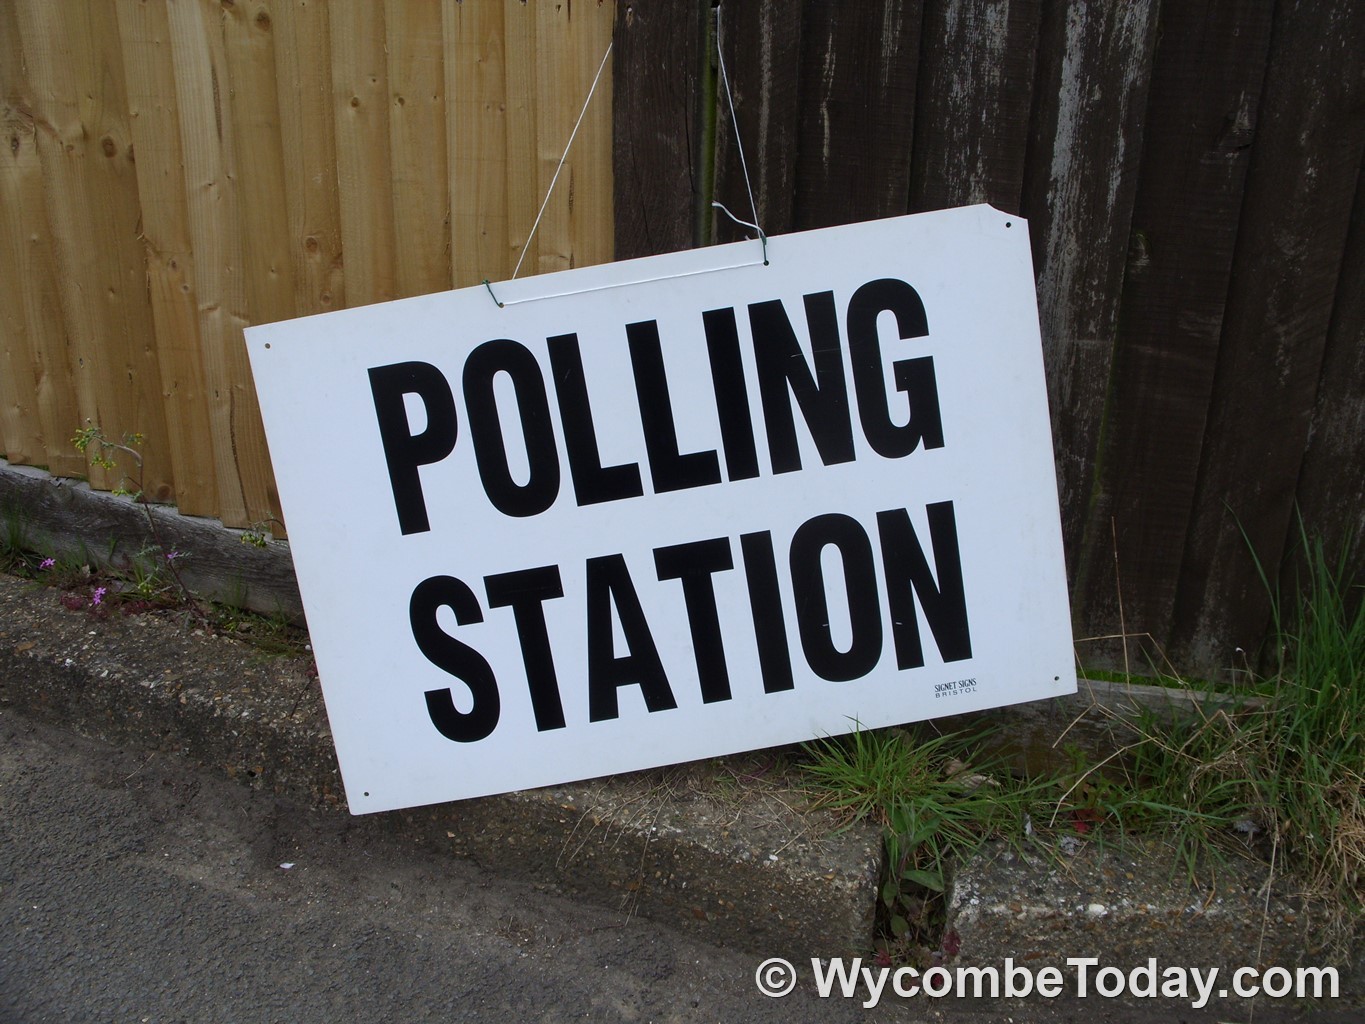 HighWycombe-SuffieldRoad-PollingStationSign-2015-05-28-SDC12681